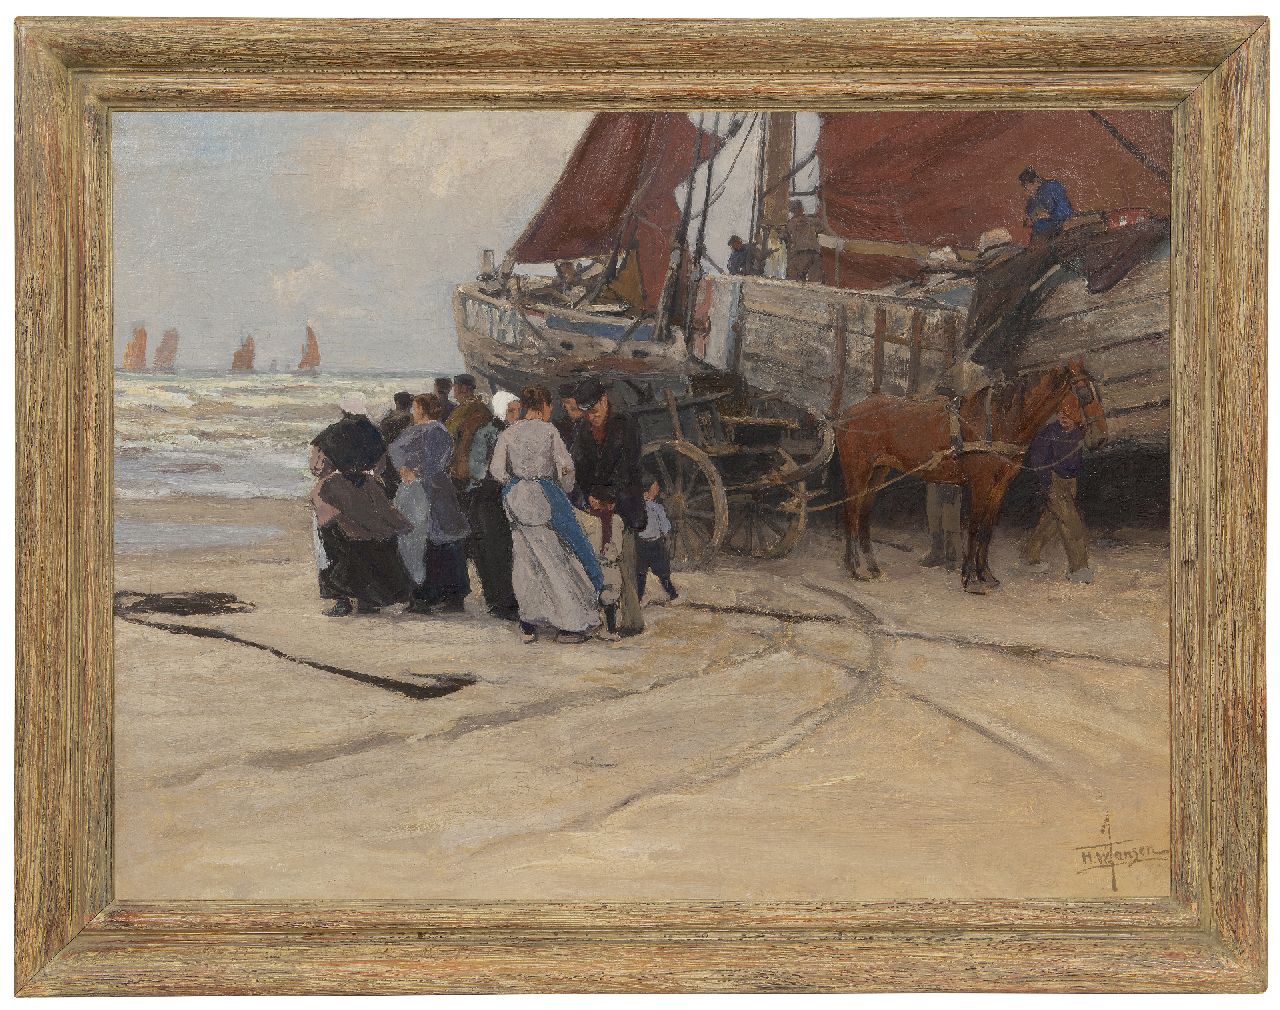 Jansen H.W.  | Hendrik Willebrord Jansen | Paintings offered for sale | The departure of the fishermen, Katwijk, oil on canvas 62.0 x 83.0 cm, signed l.r.